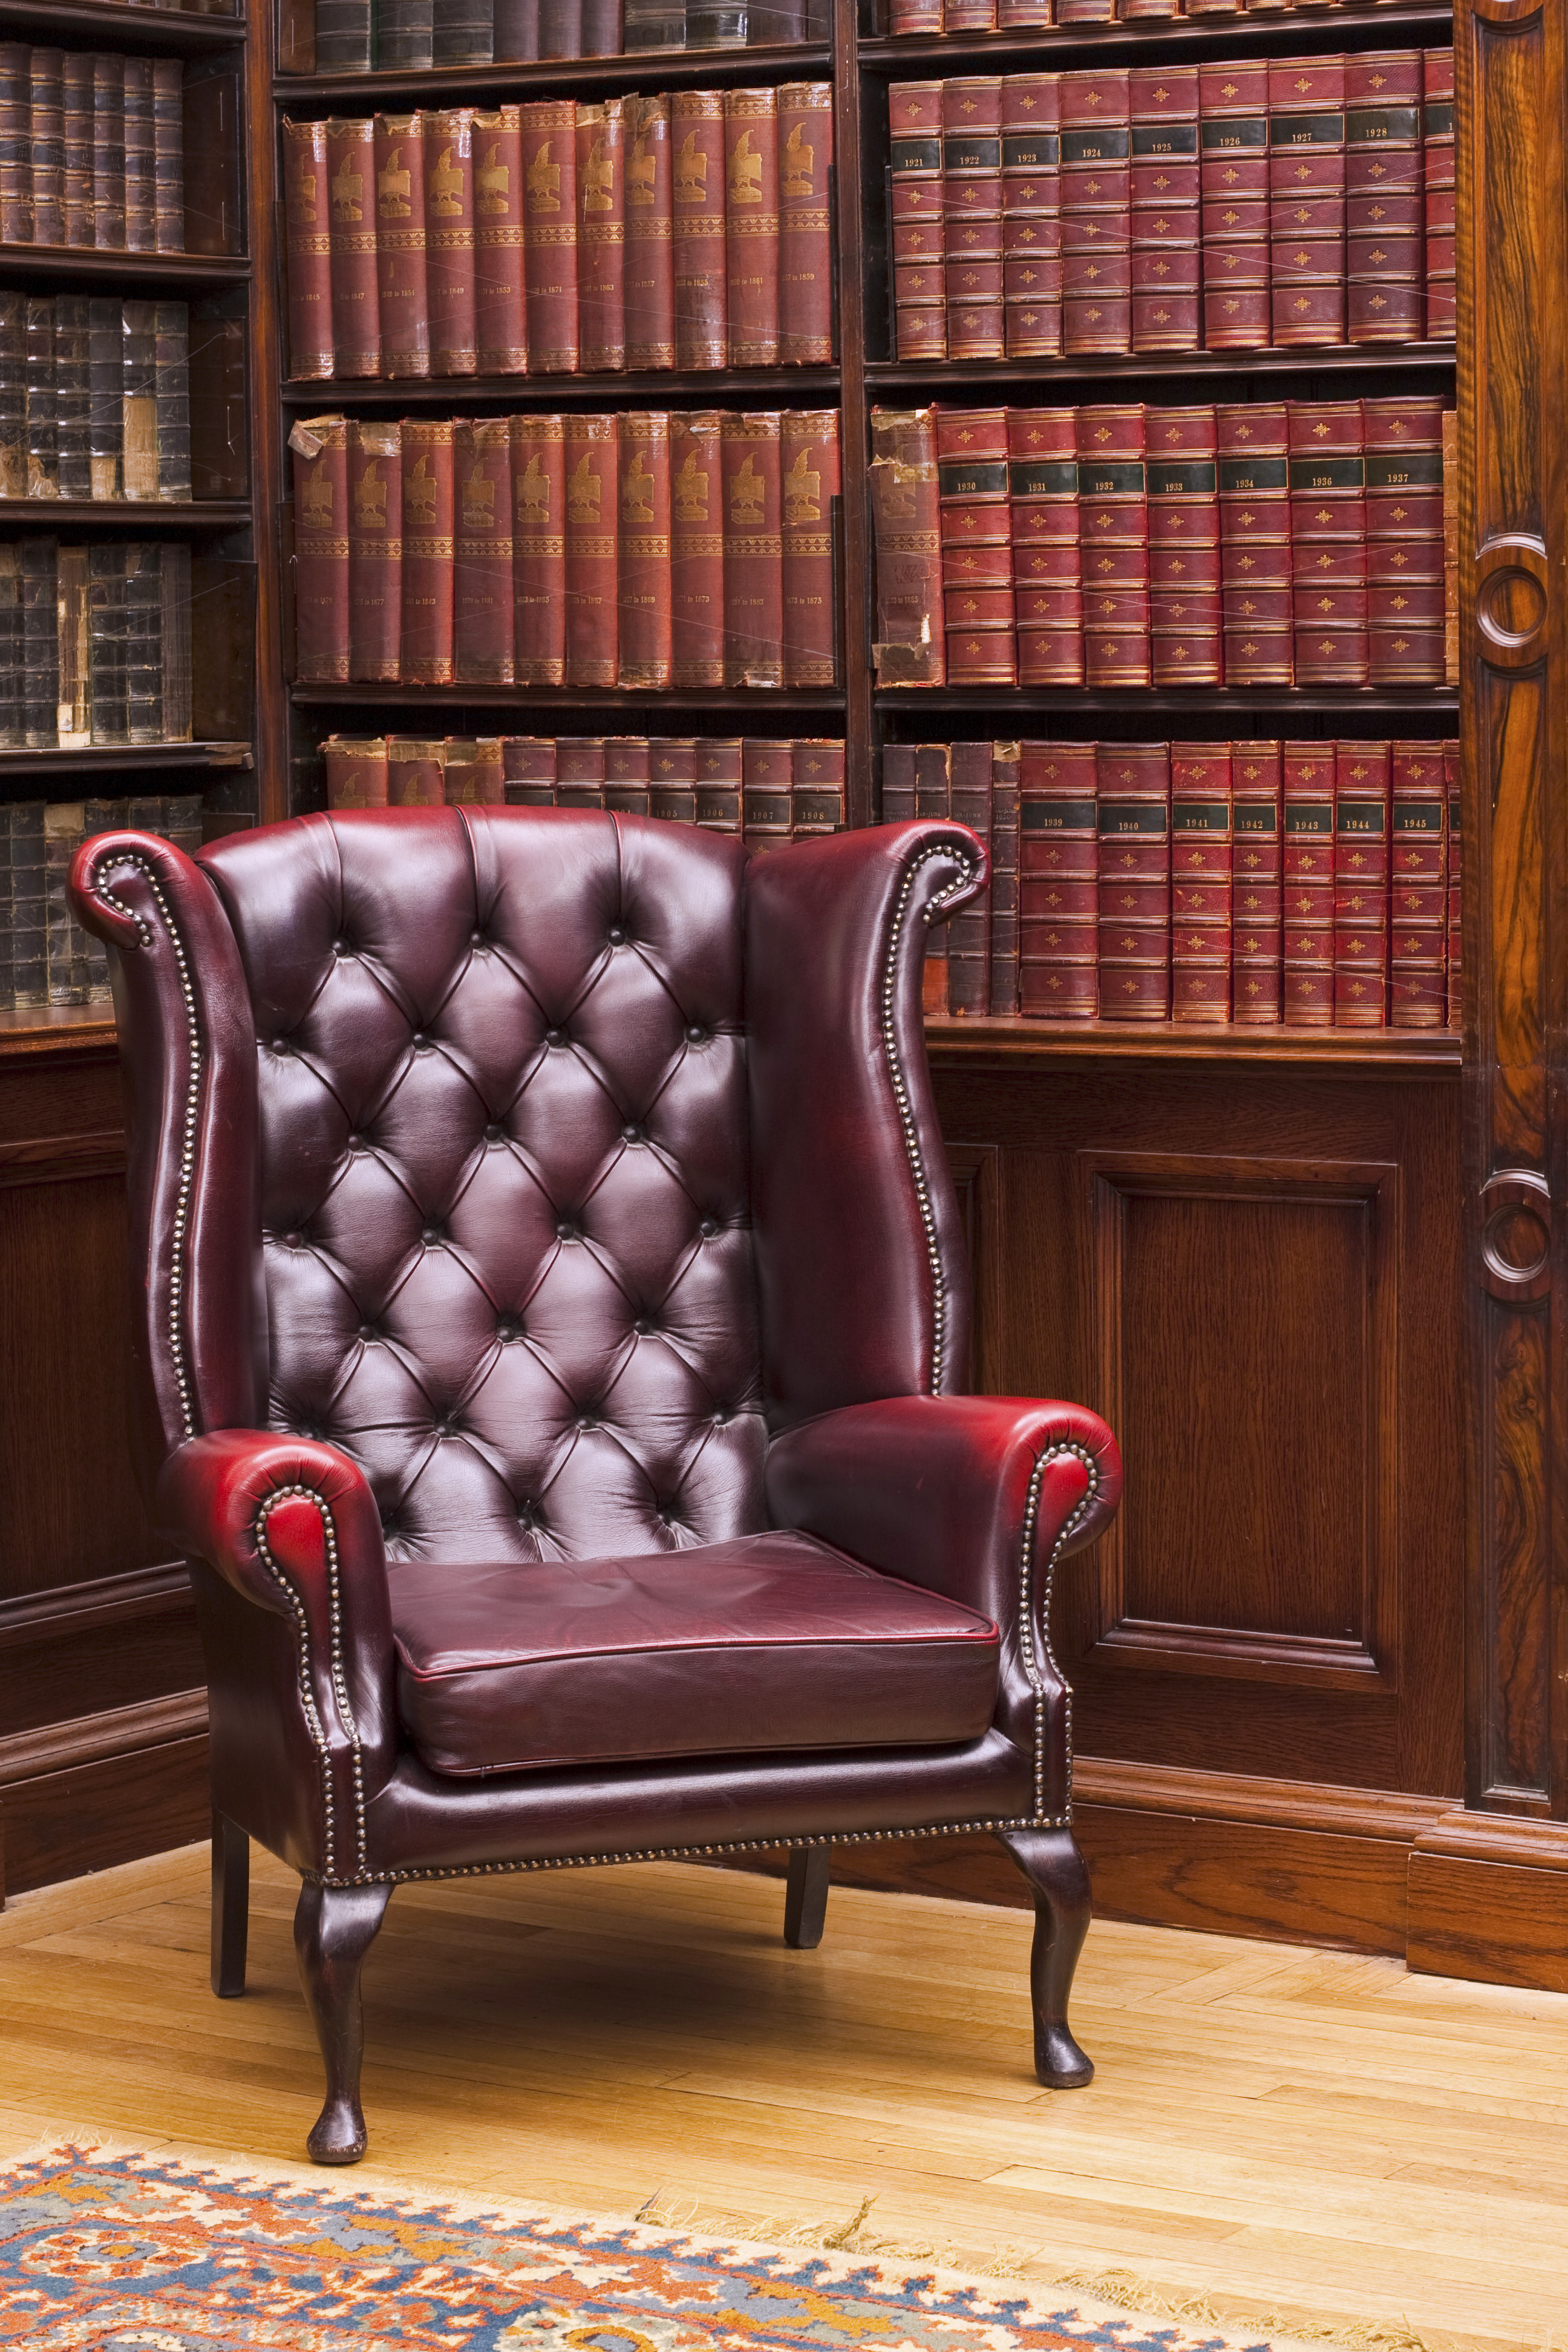 Traditional Chesterfield chair in classical library room